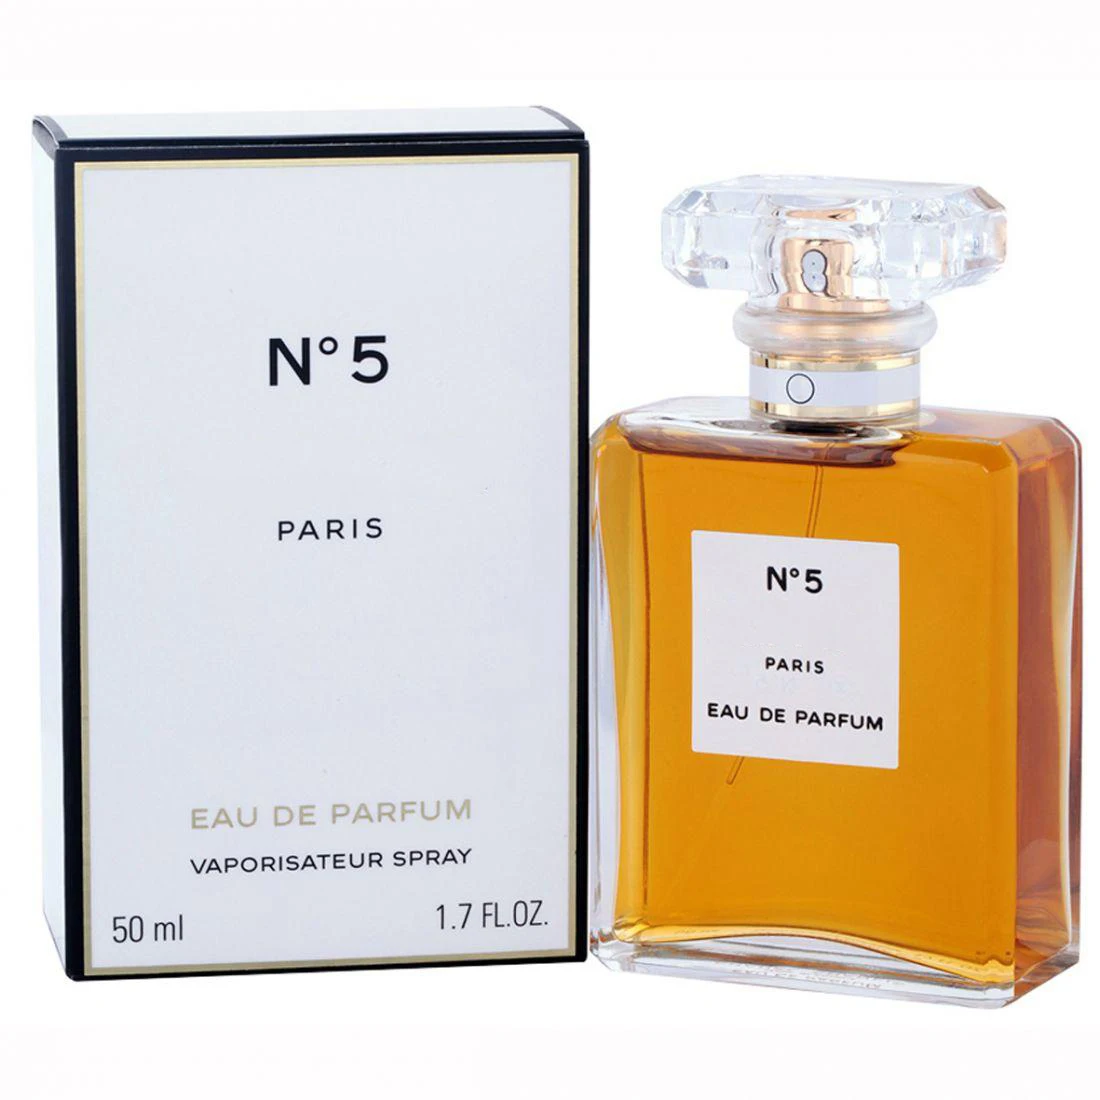 Perfume Chanel No5 parting 5/10/15/20/30 ml; perfume Chanel number 5  legendary fragrance very resistant